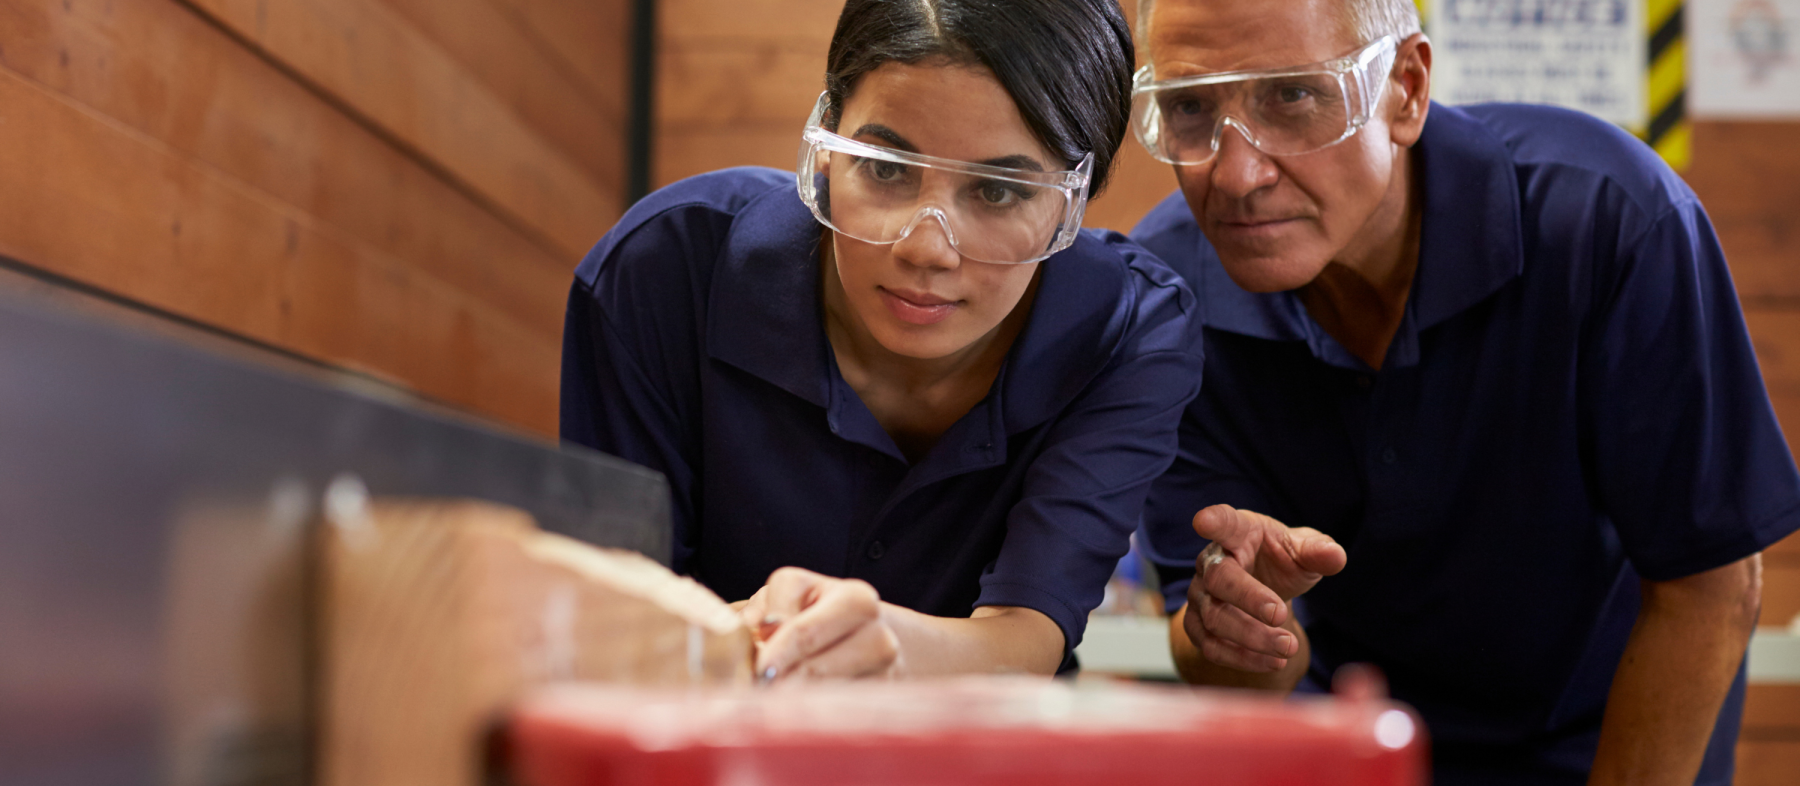 A student wears safety goggles in an apprenticeship enviroment